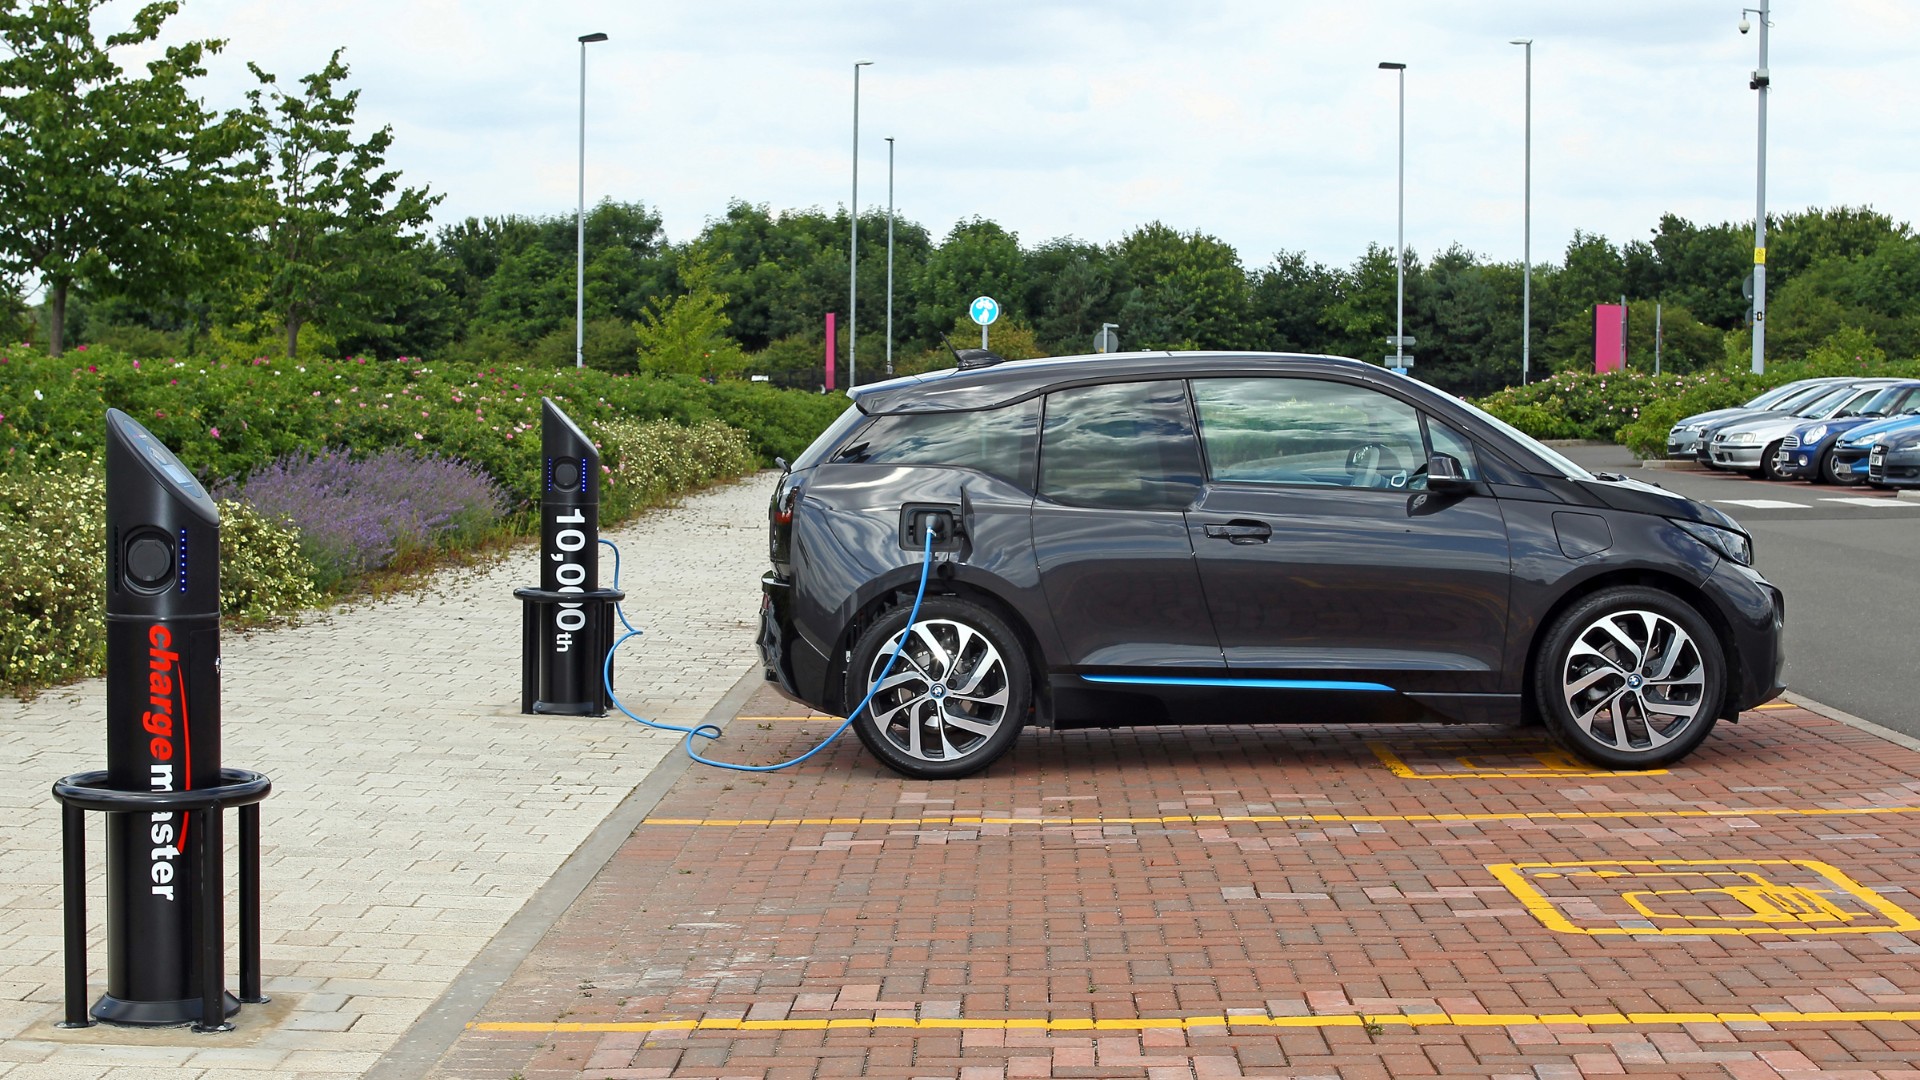 What will tempt UK drivers into electric cars